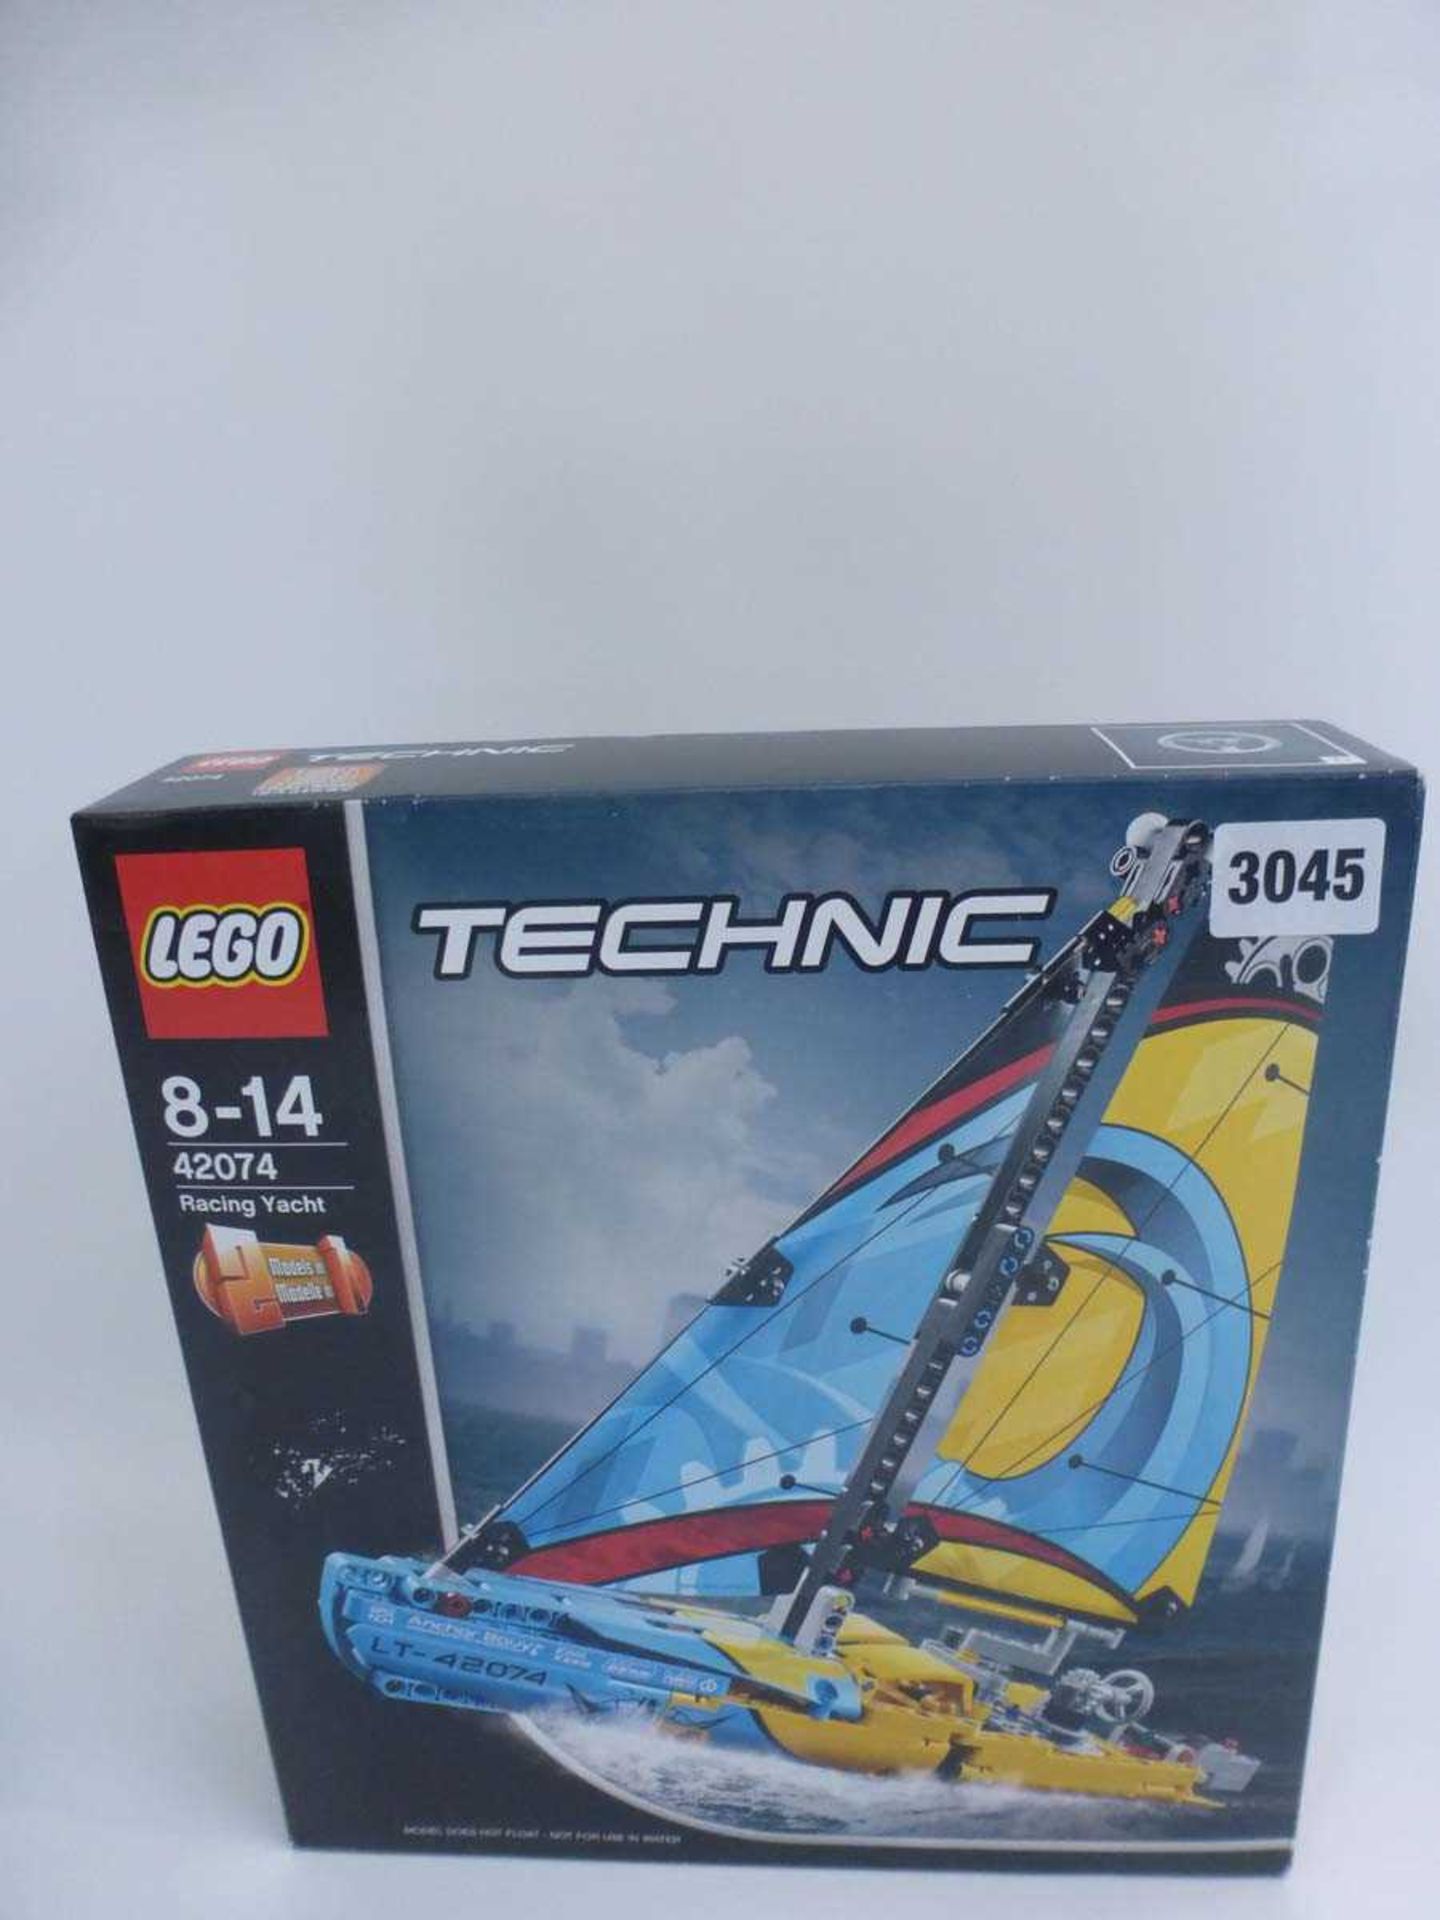 A Lego Technic 42074 Racing Yacht set, boxedContents unchecked